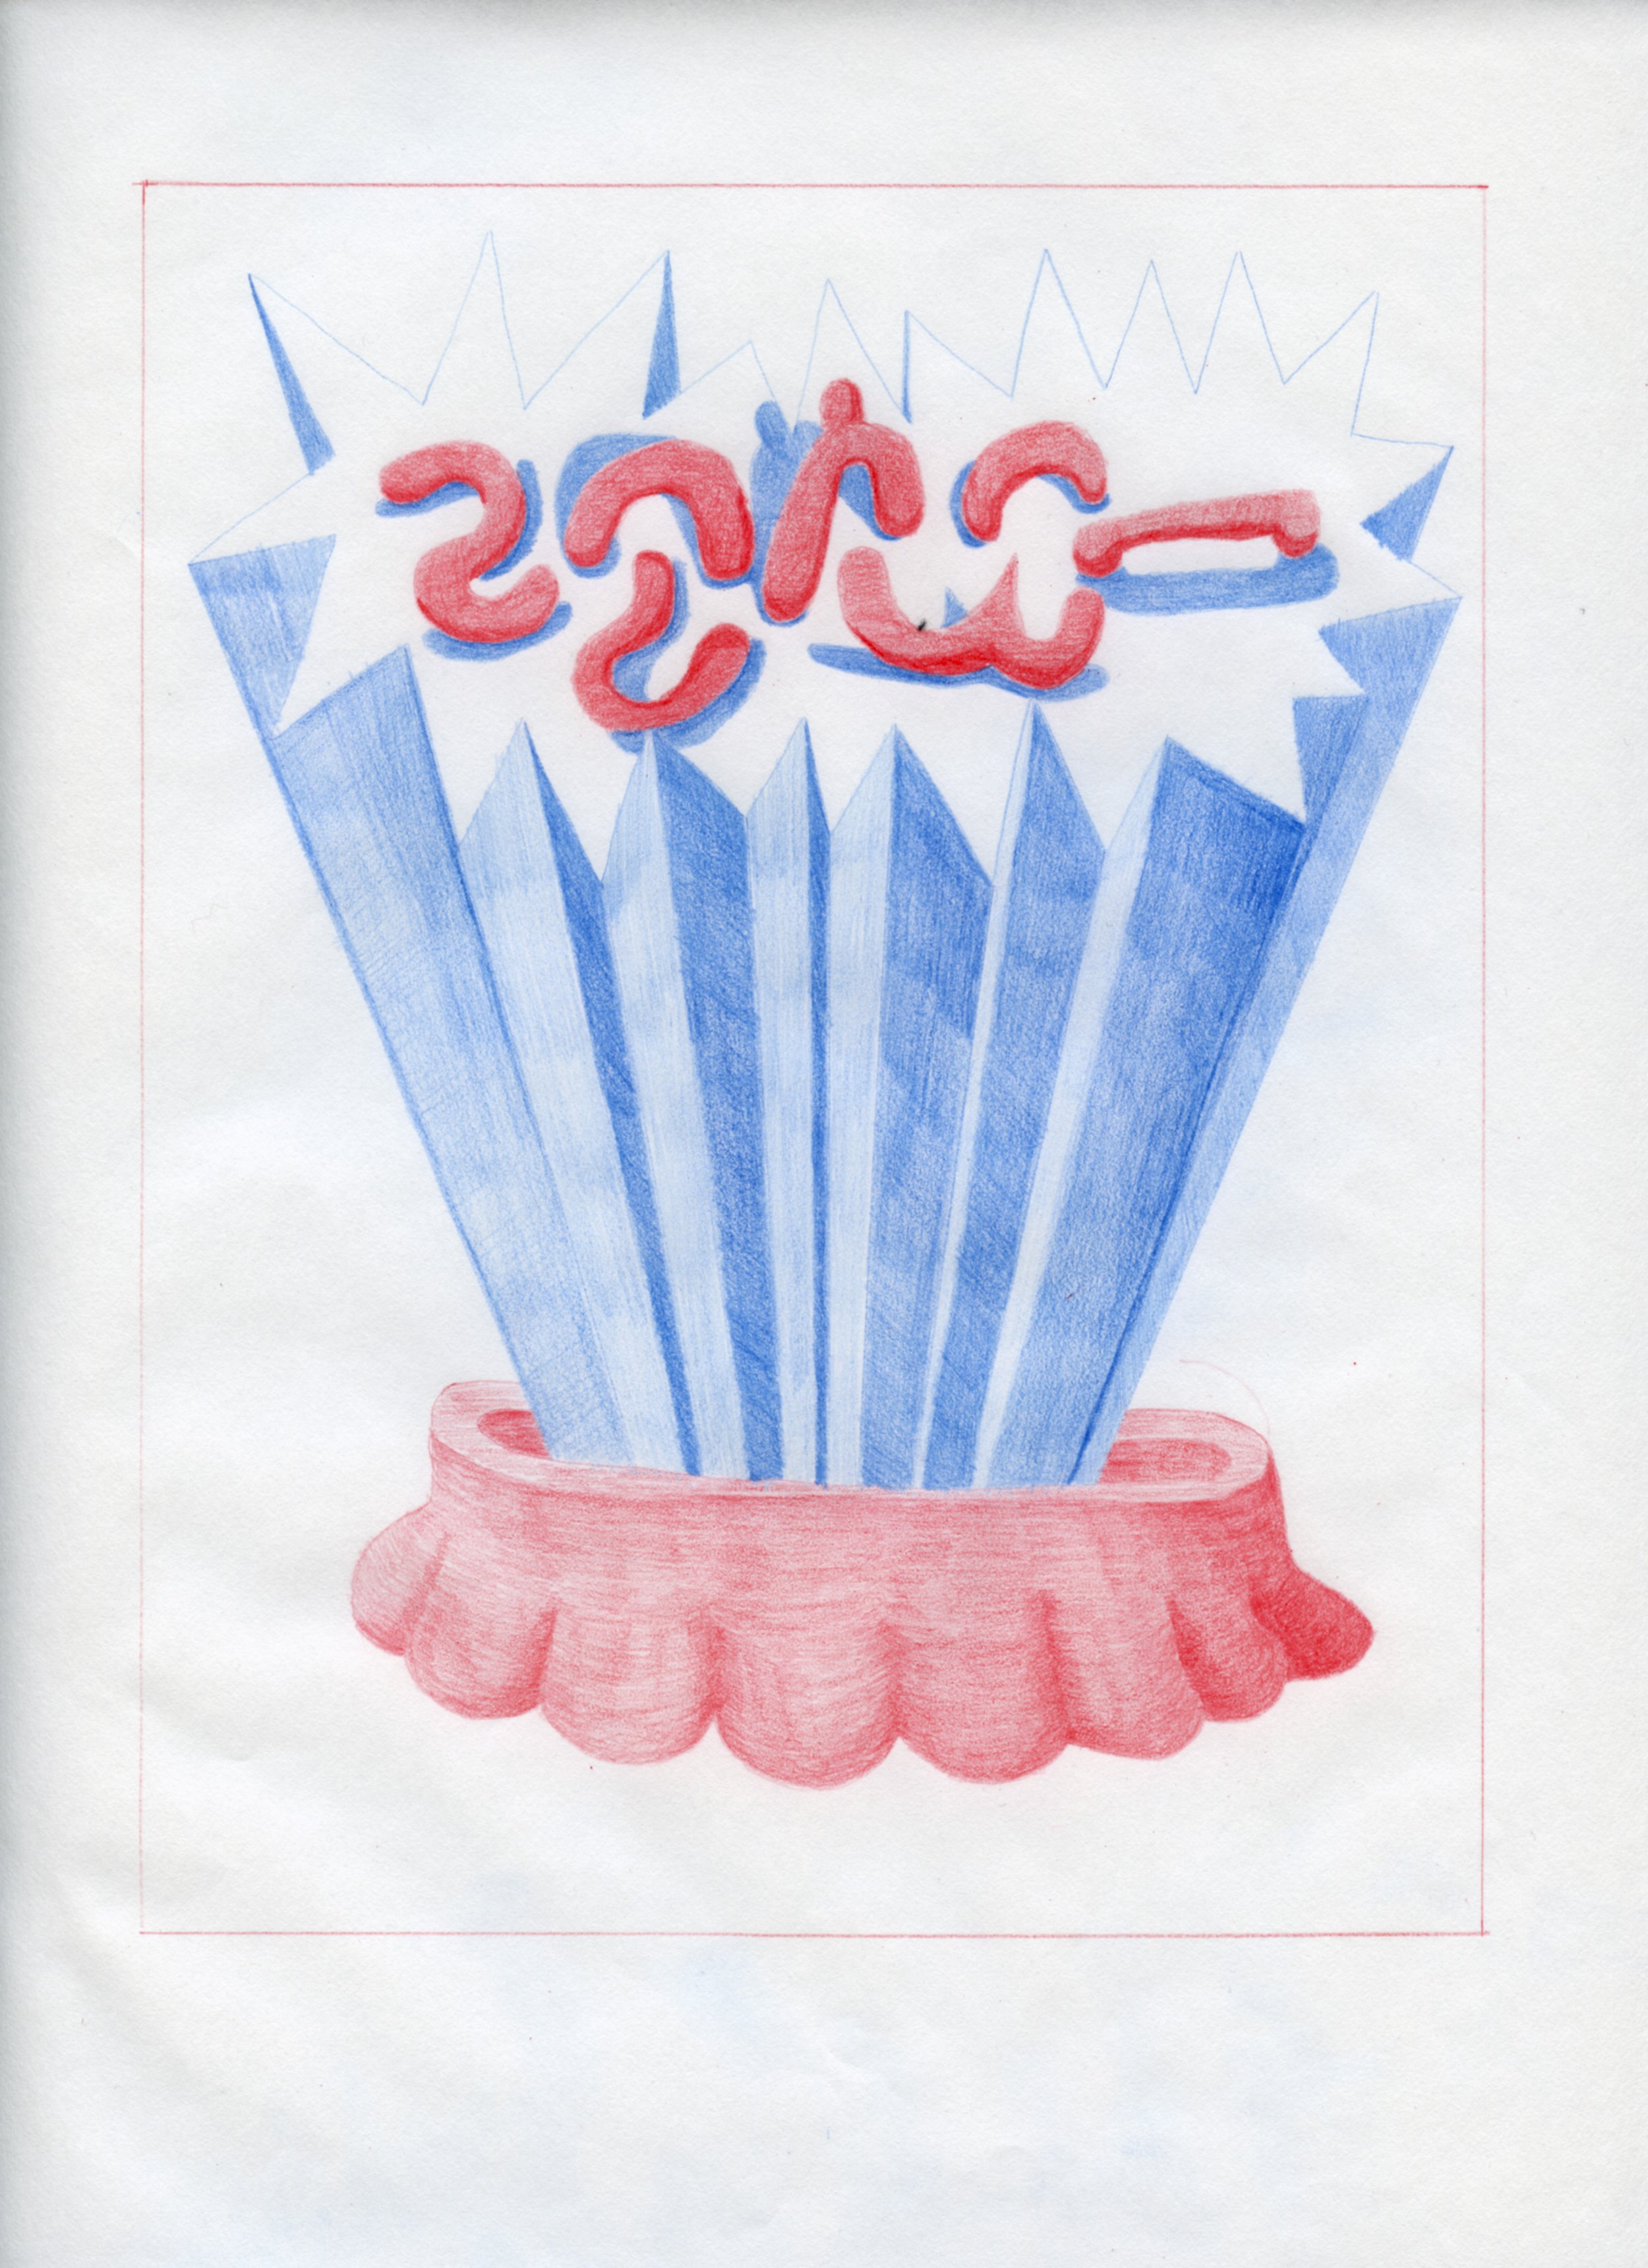  Workplace Drawing #7 2021, Red and Blue Graphite on Bond Paper, 9”x 12”. 